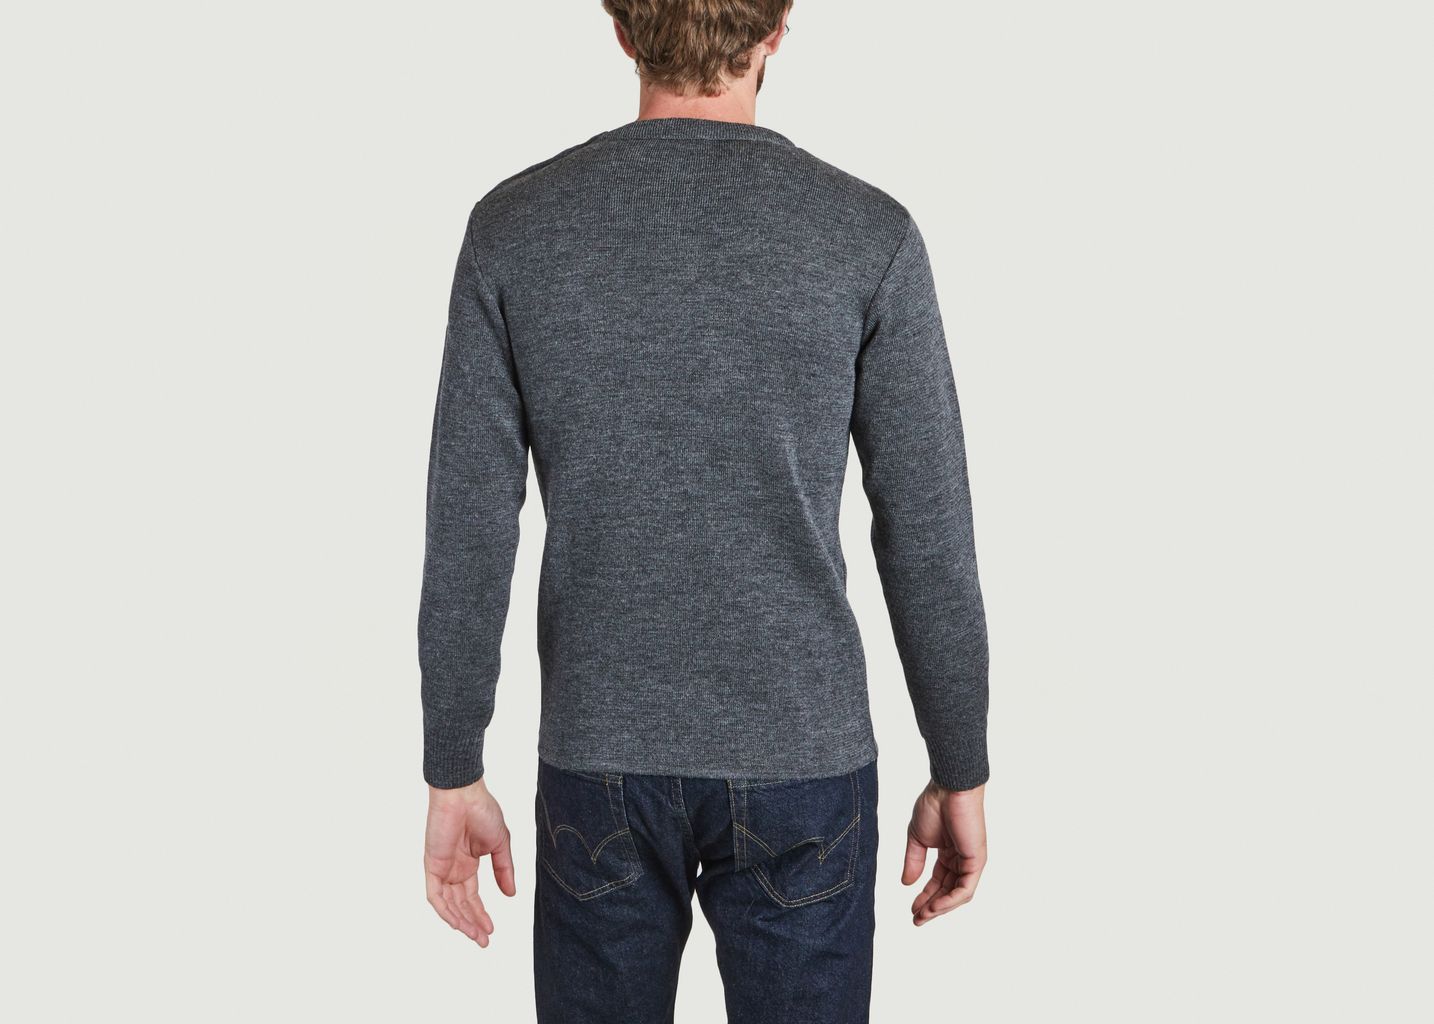 Fouesnant plain sailor sweater in wool - Armor Lux